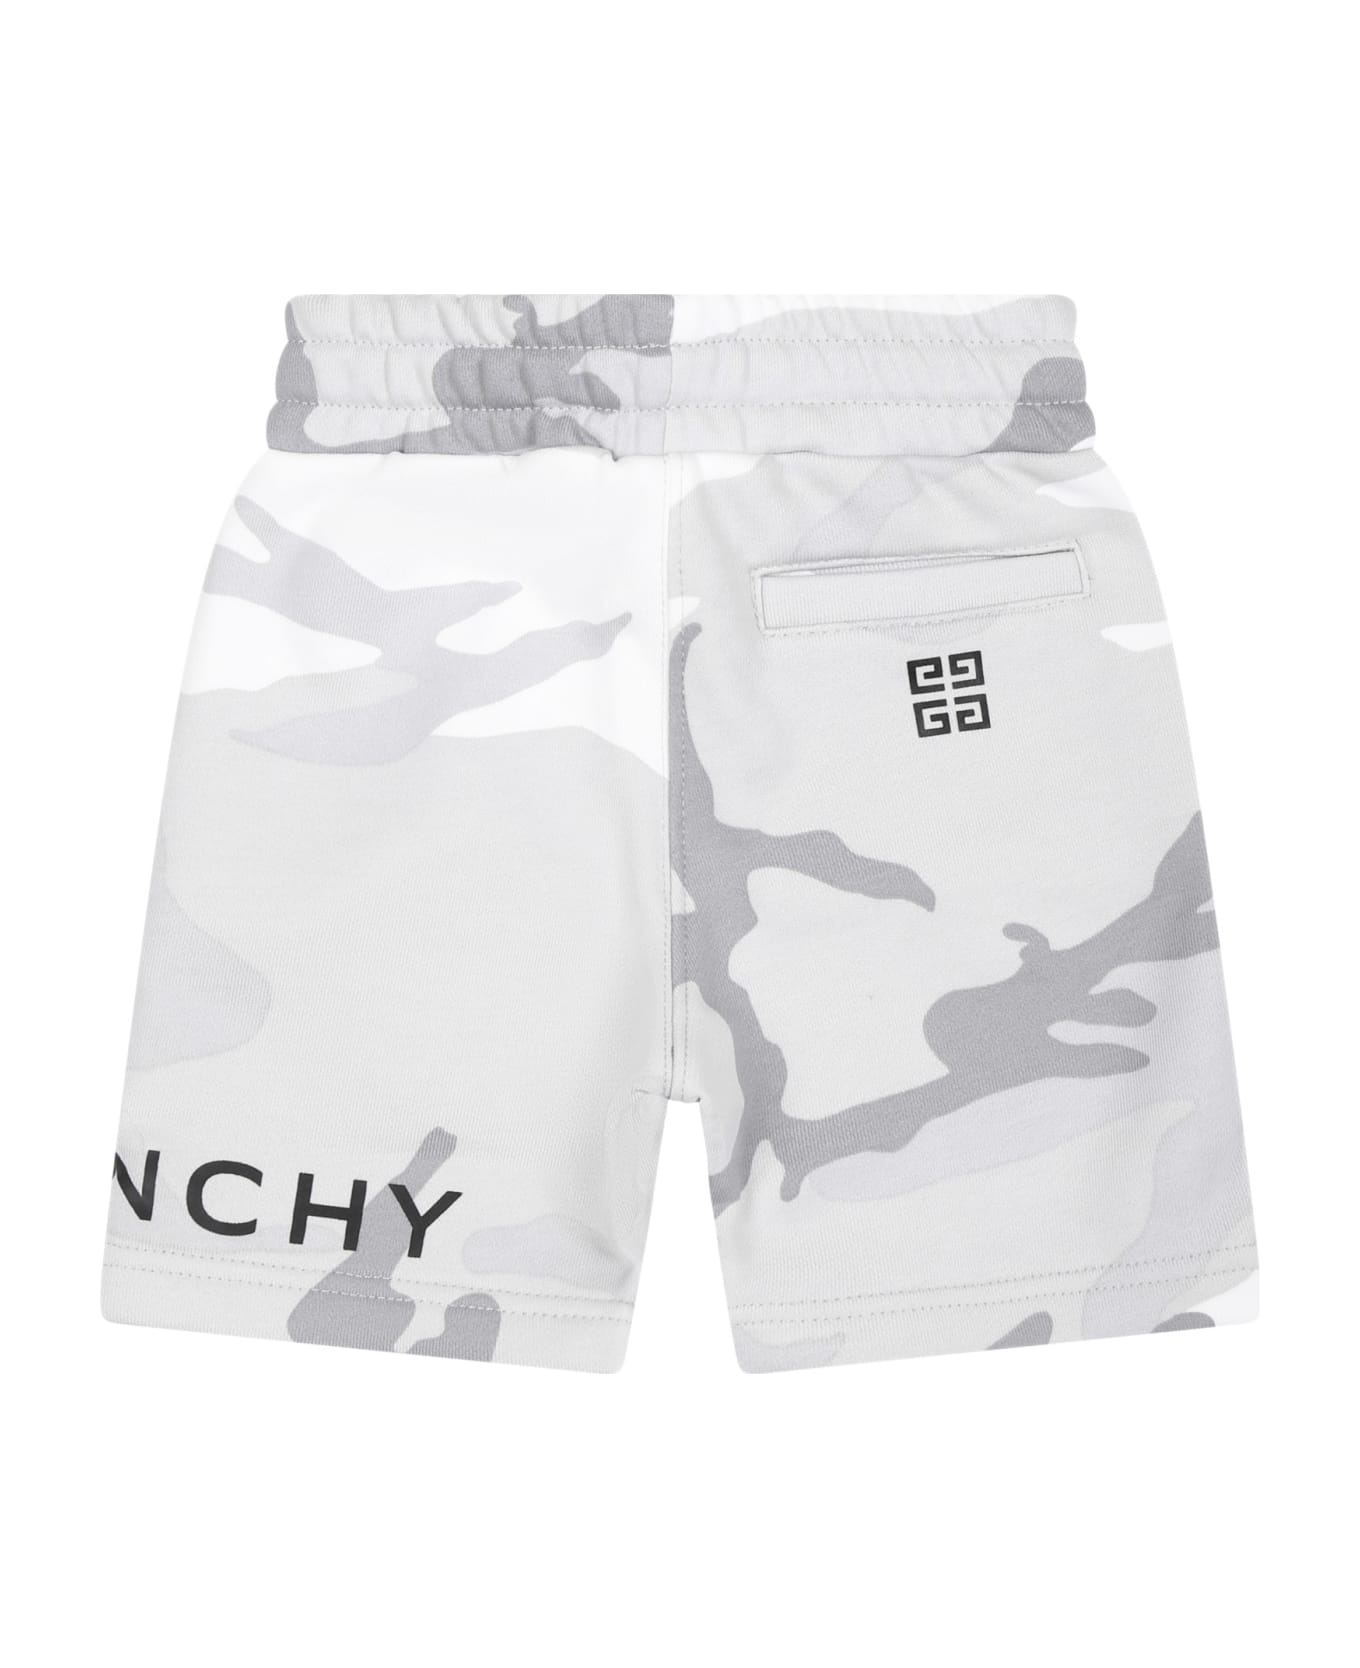 Givenchy Nike Grey Shorts For Baby Boy With Camouflage Print And Logo - Grey